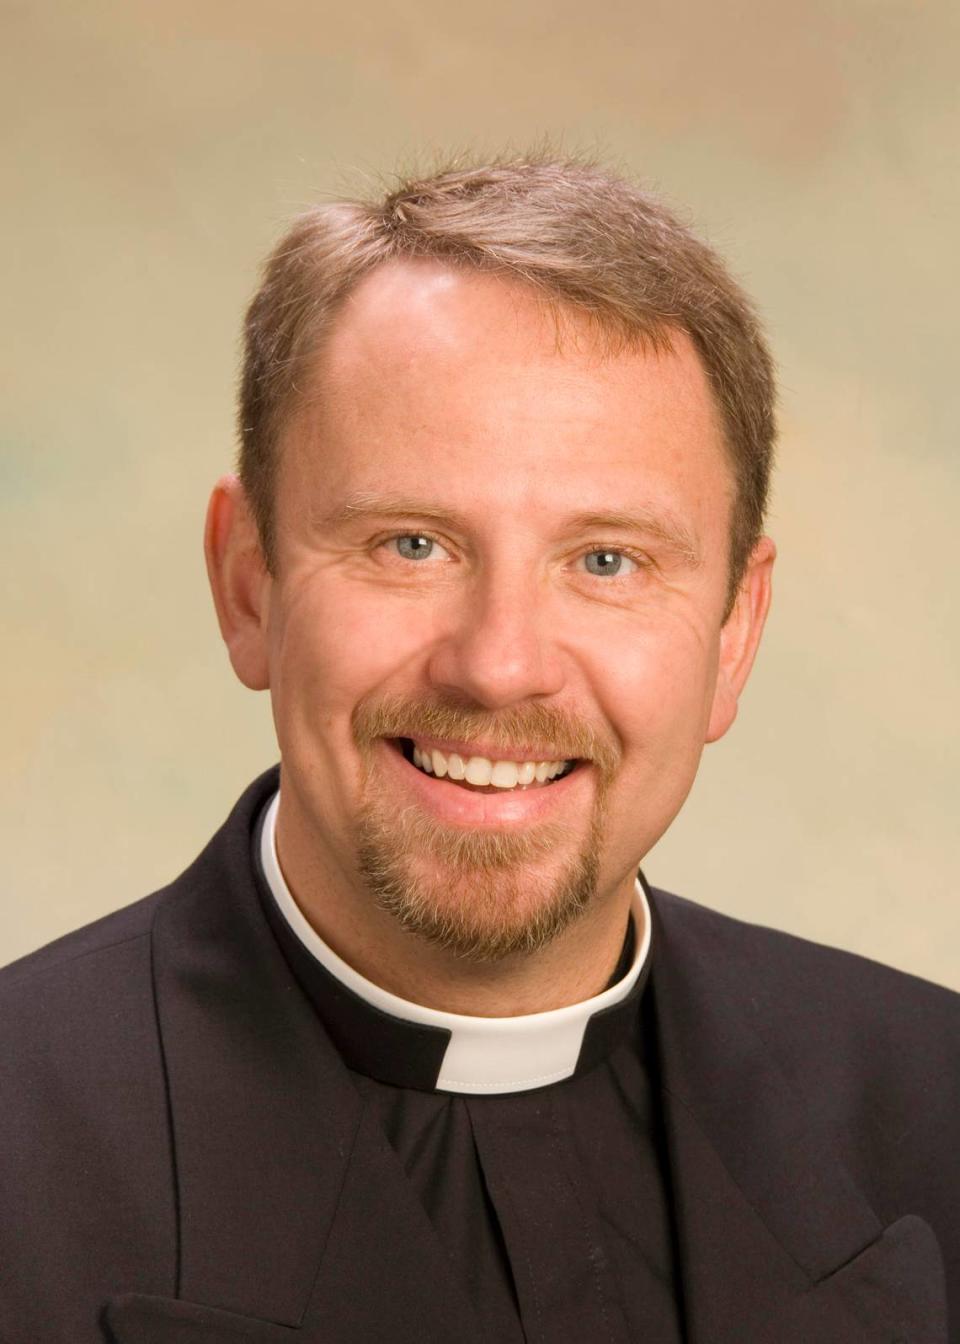 The Rev. Samuel Colley-Toothaker, Dean of Fresno’s St. James Episcopal Cathedral.